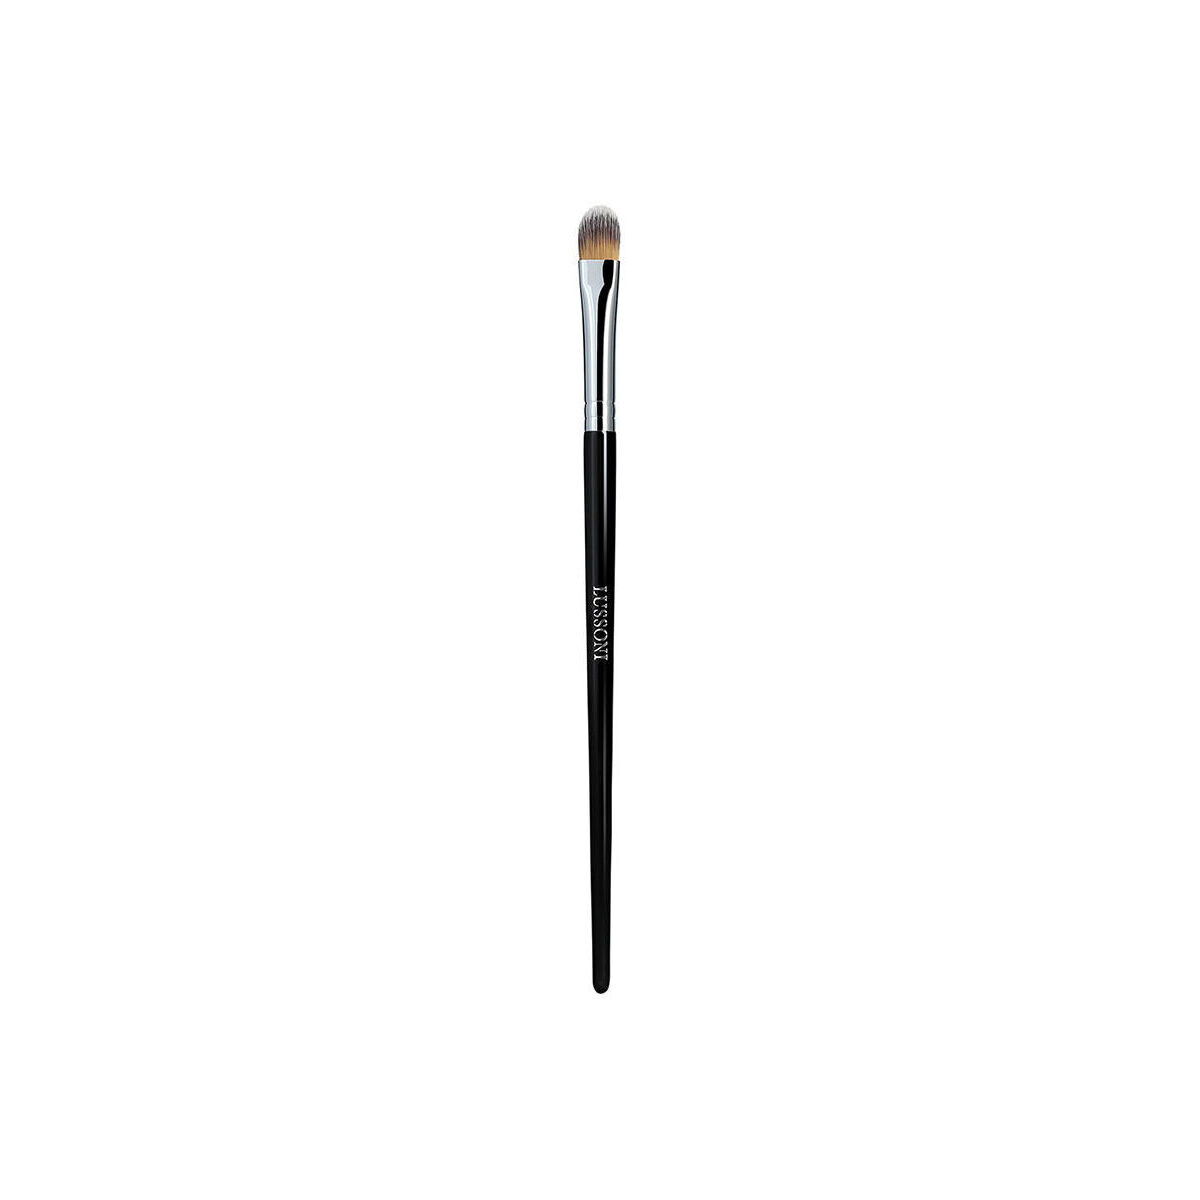 Beauty Pinsel Lussoni Pro Concealer Pinsel 130 1 St 